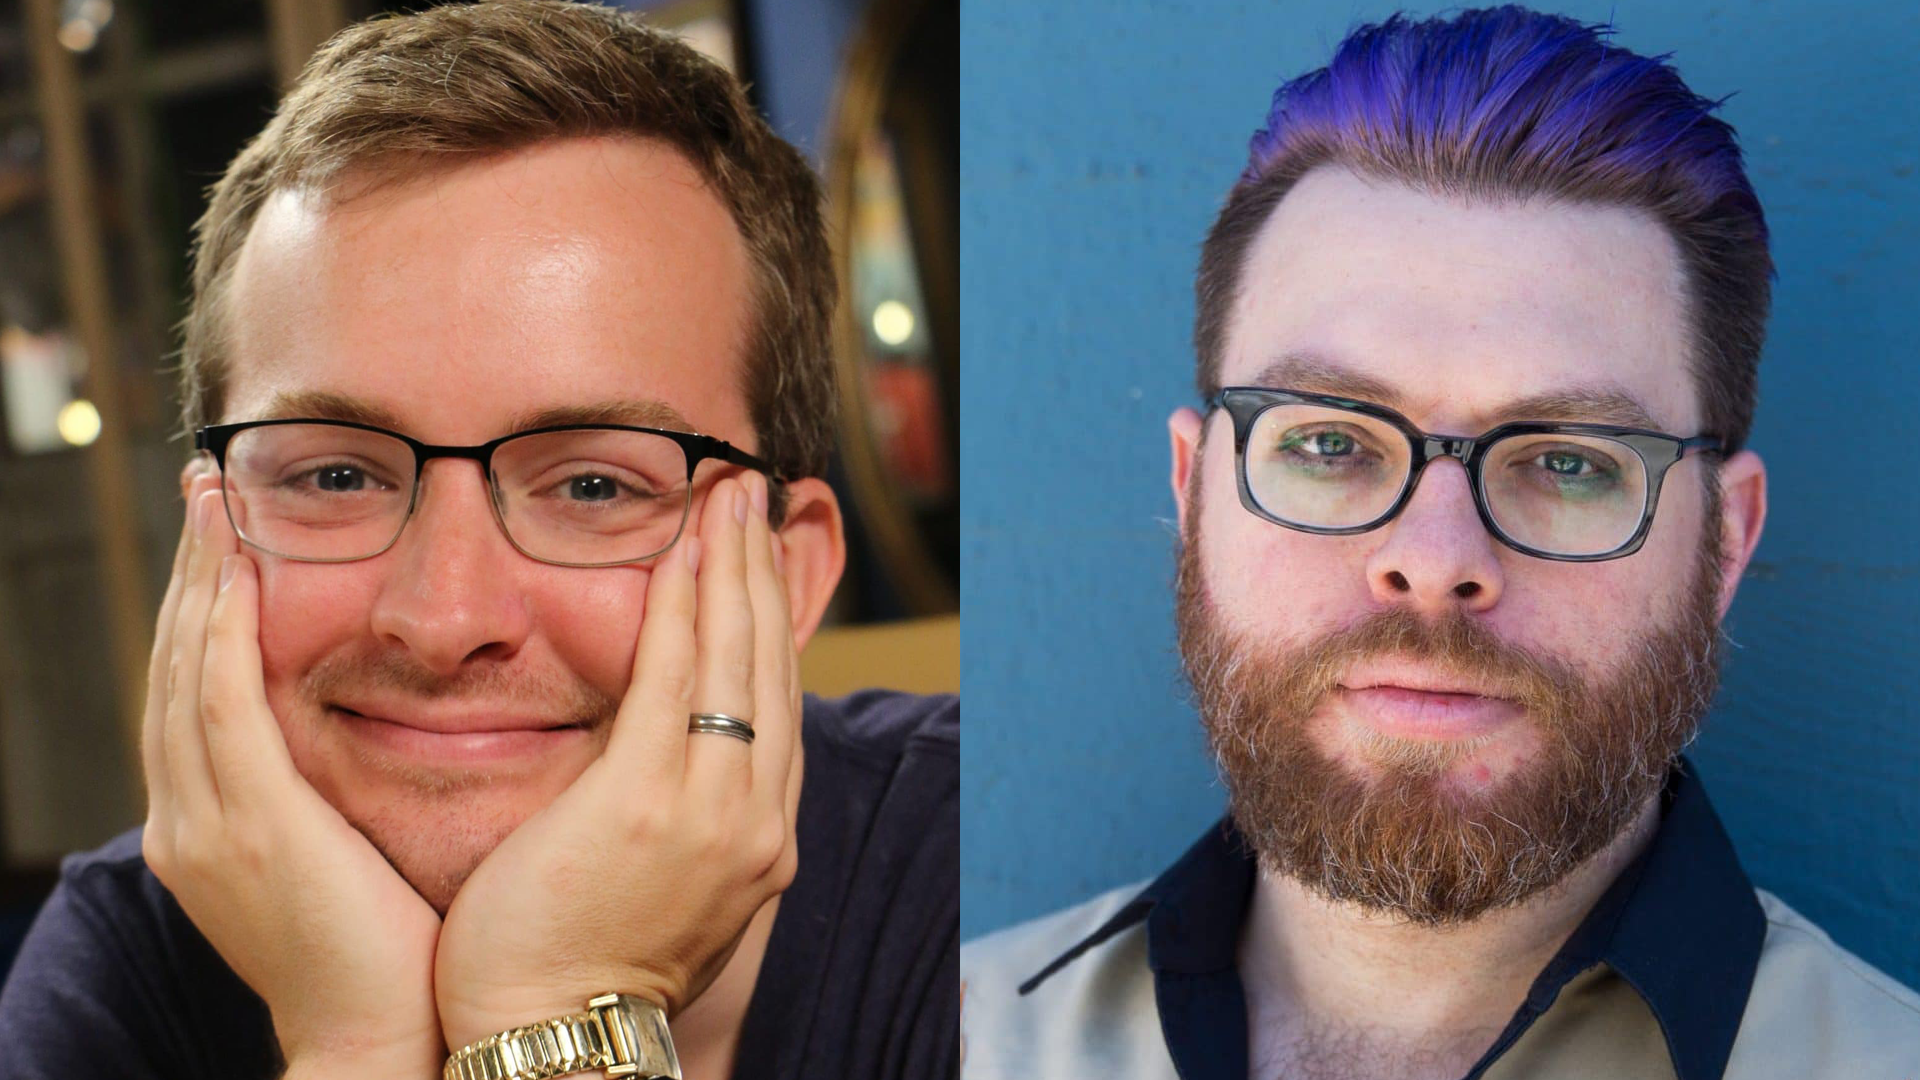 Headshots of Griffin and Travis McElroy.